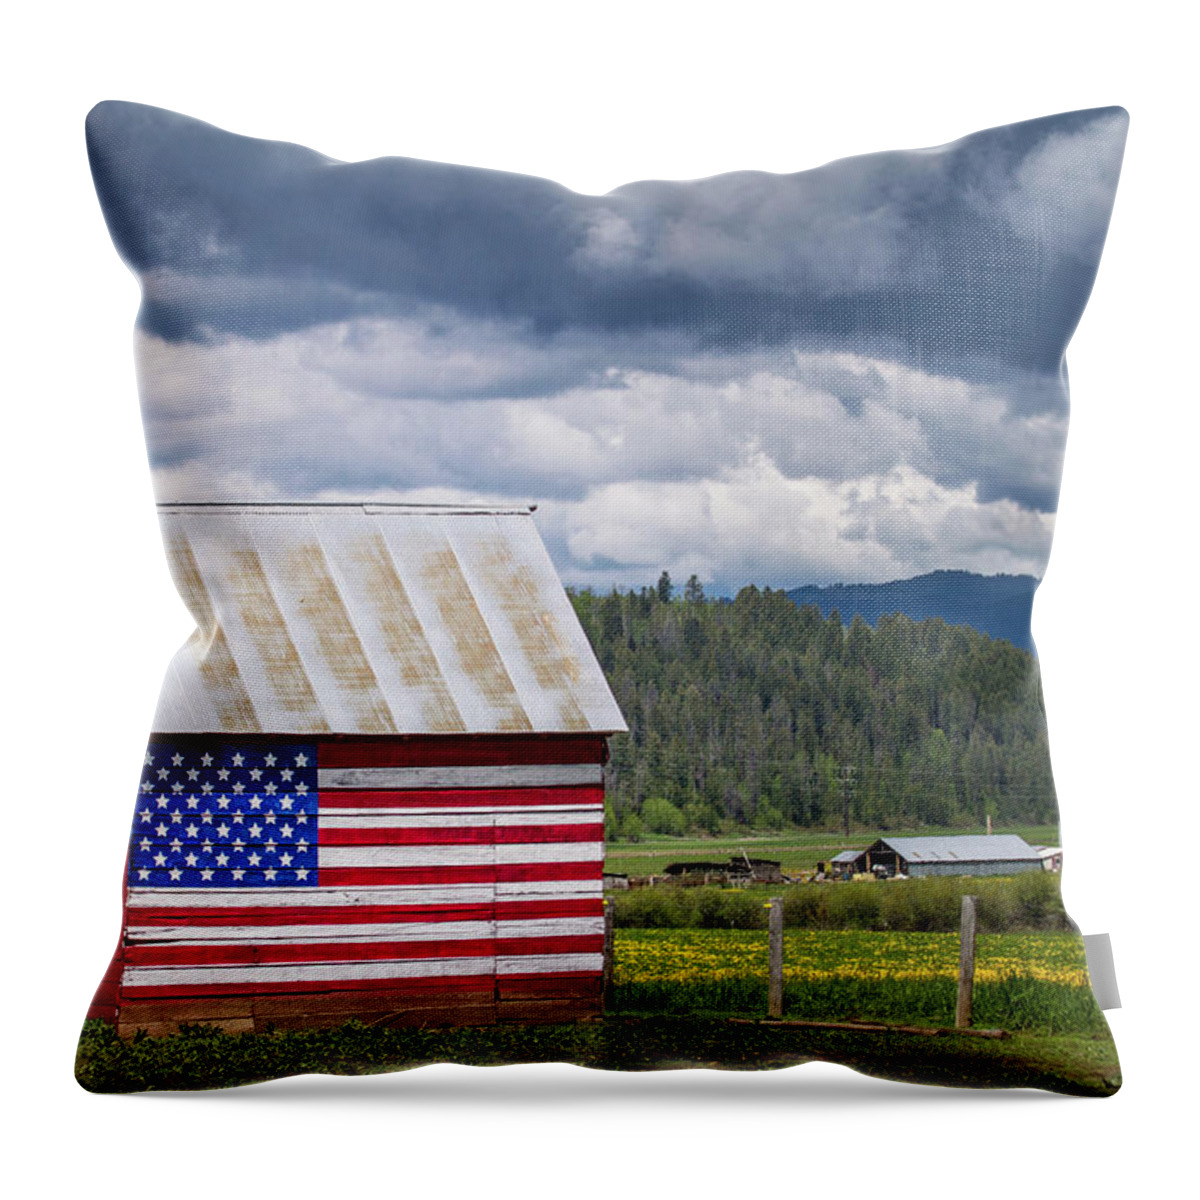 America Throw Pillow featuring the photograph American Landscape by Wesley Aston